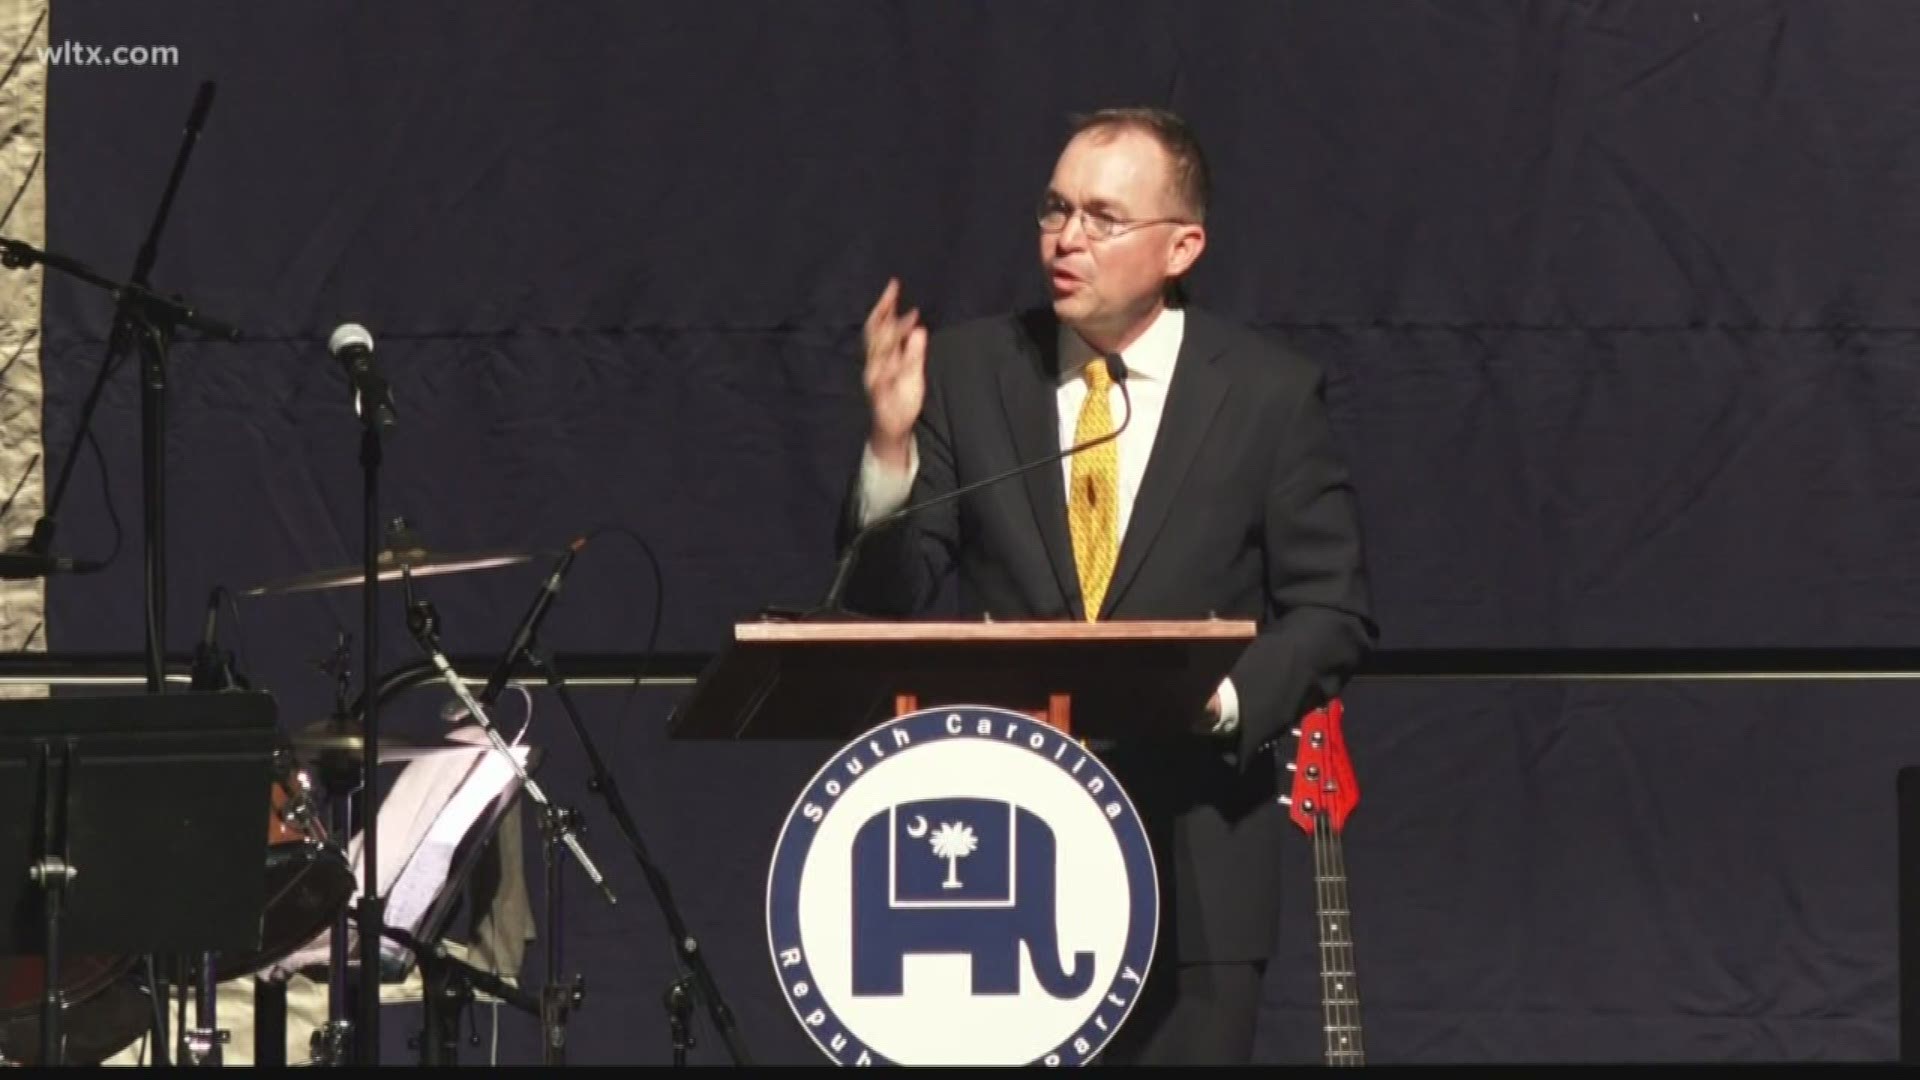 The keynote speaker the the 52nd event was former SC Rep. and acting White House chief of Staff Mick Mulvaney.